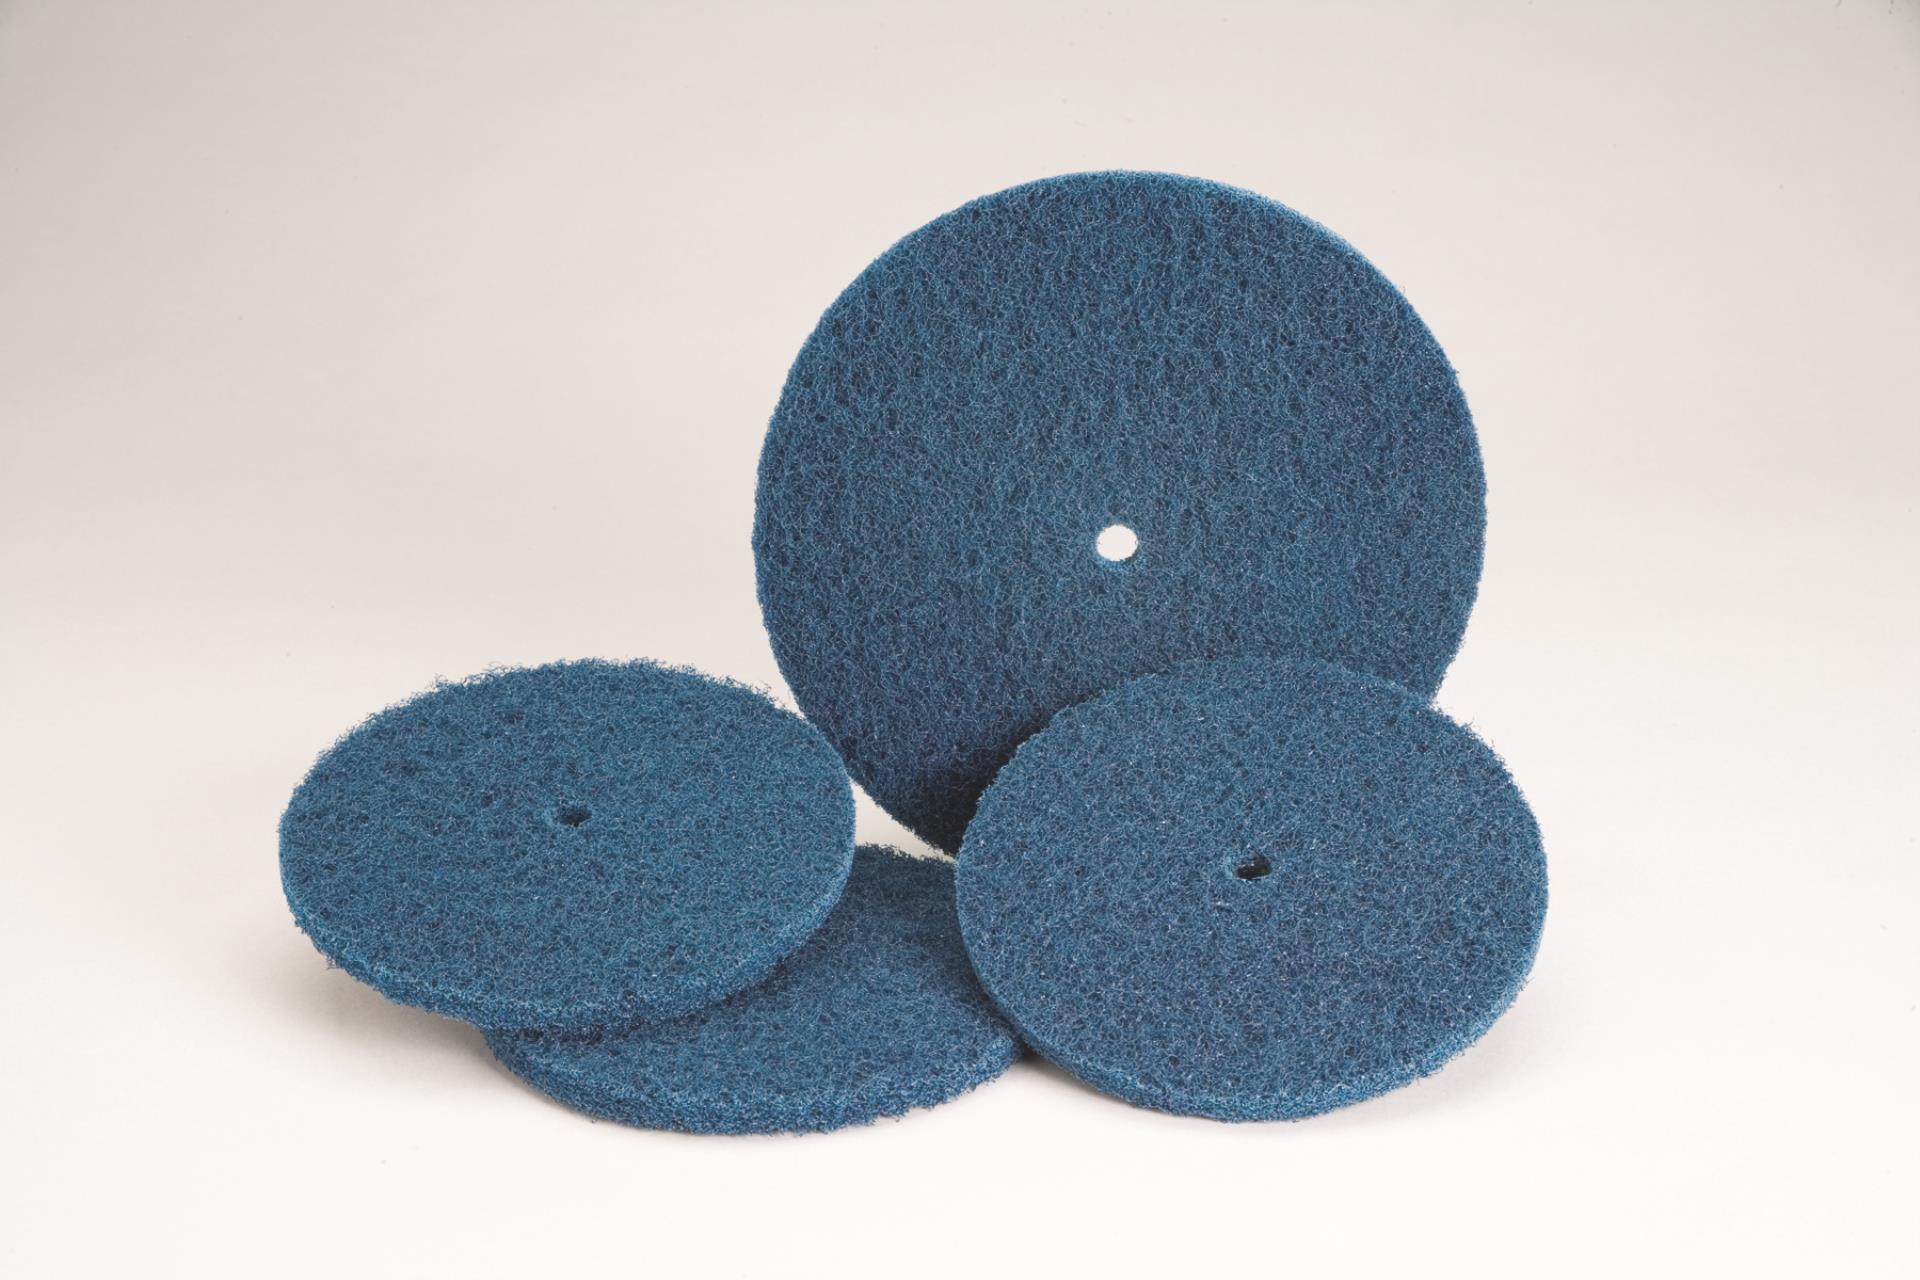 Standard Abrasives Quick Change TS Buff and Blend GP Disc 840415 3 in A VFN 3M 